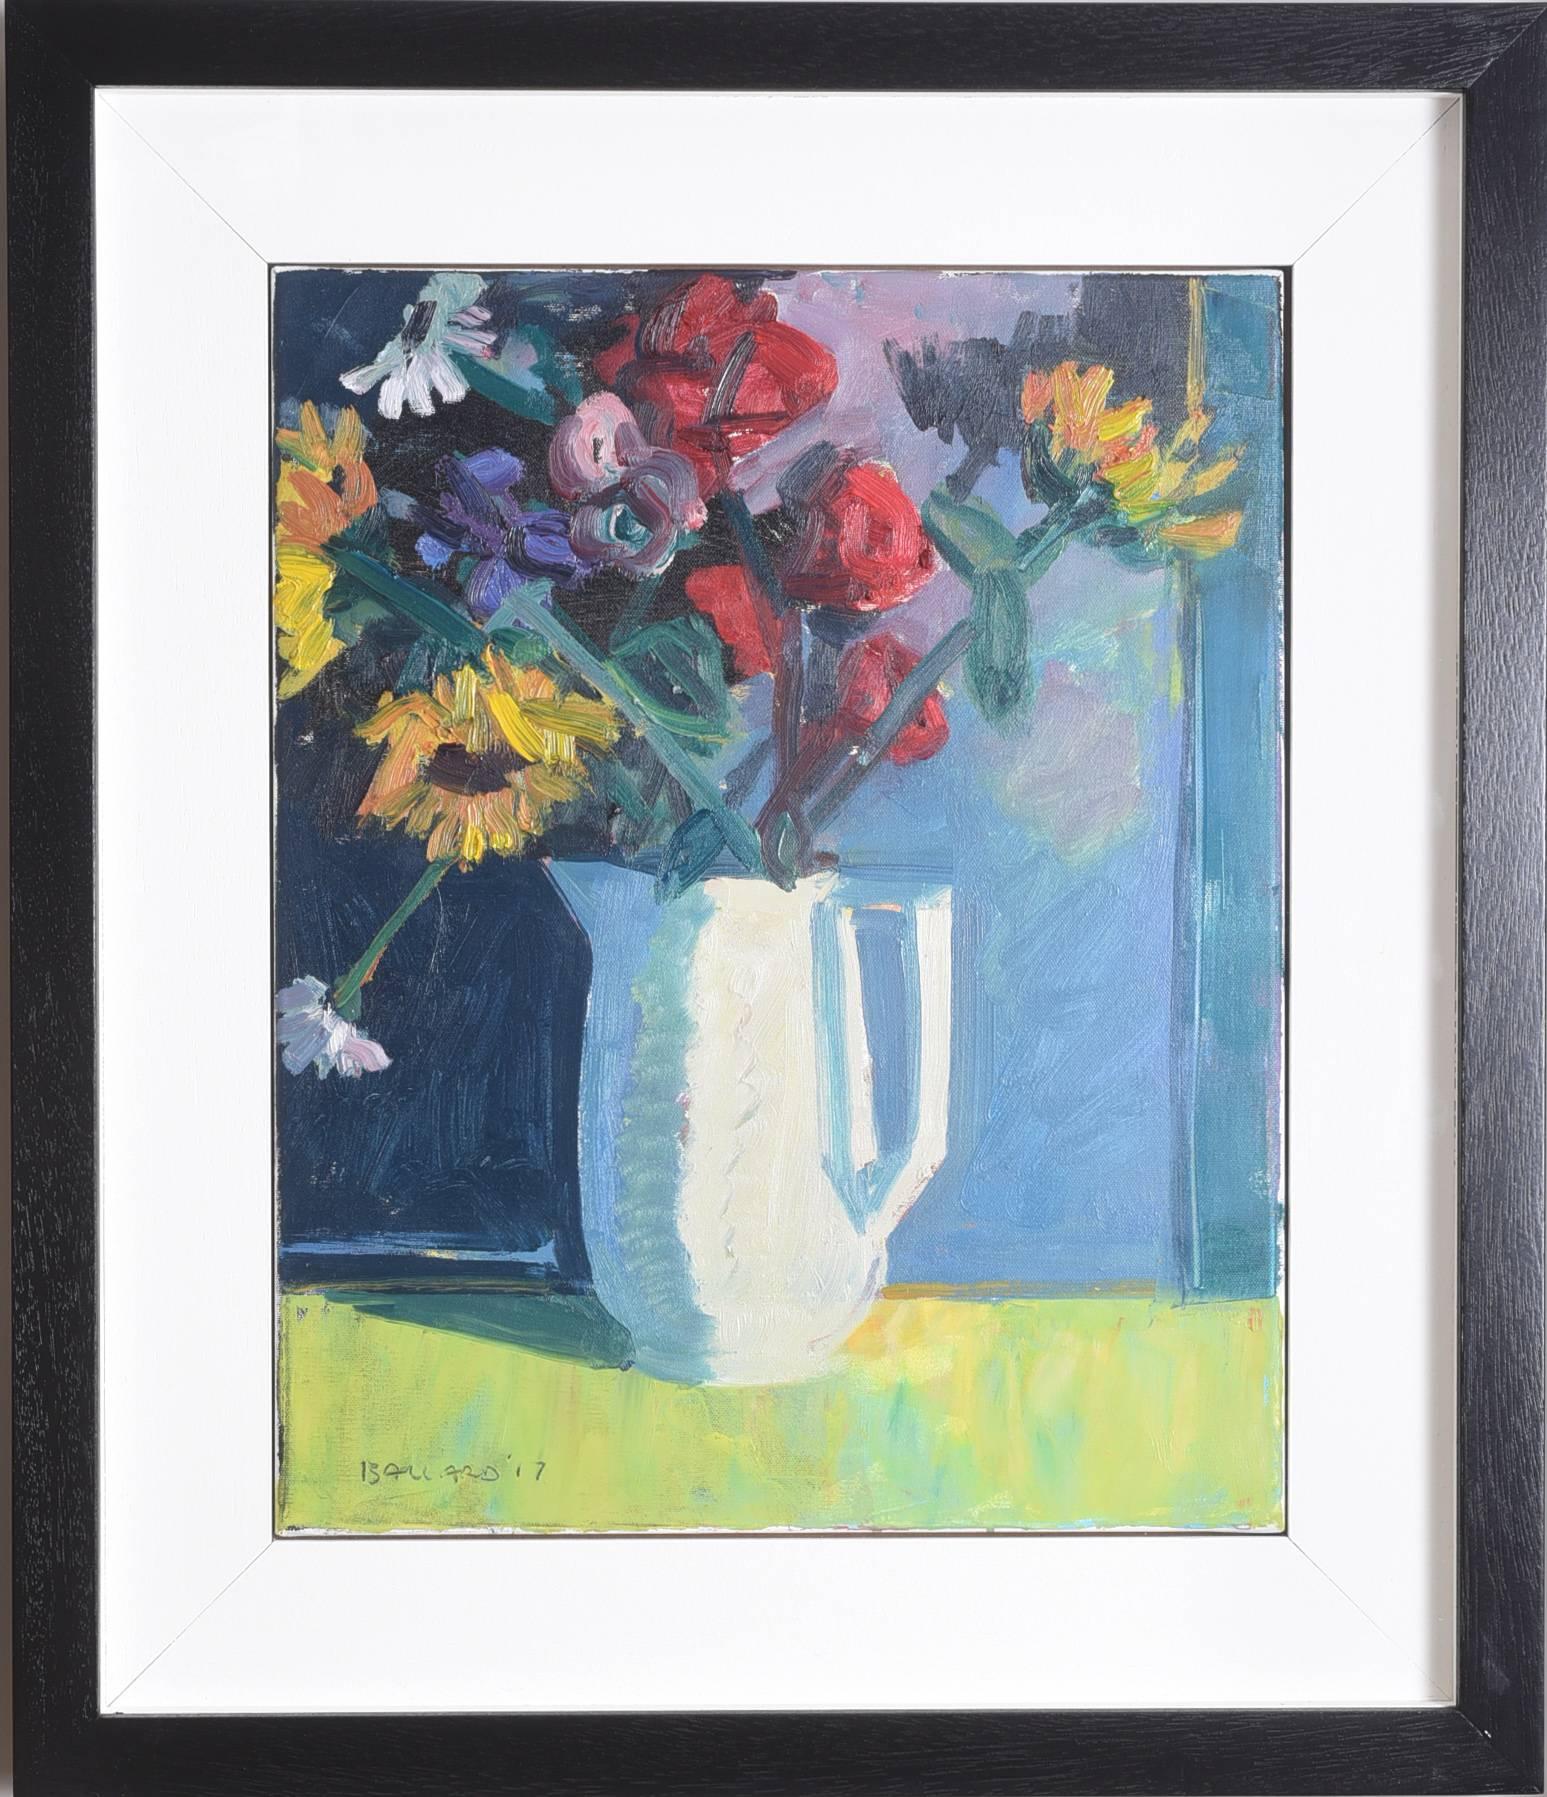 Oil on canvas
Signed
Framed
Measure: 19 x 15 inches (27 x 24 inches framed)

Brian Ballard was born in Belfast in 1942 and was educated at the College of Art, Belfast and then at the College of Art in Liverpool. He now lives in Belfast but